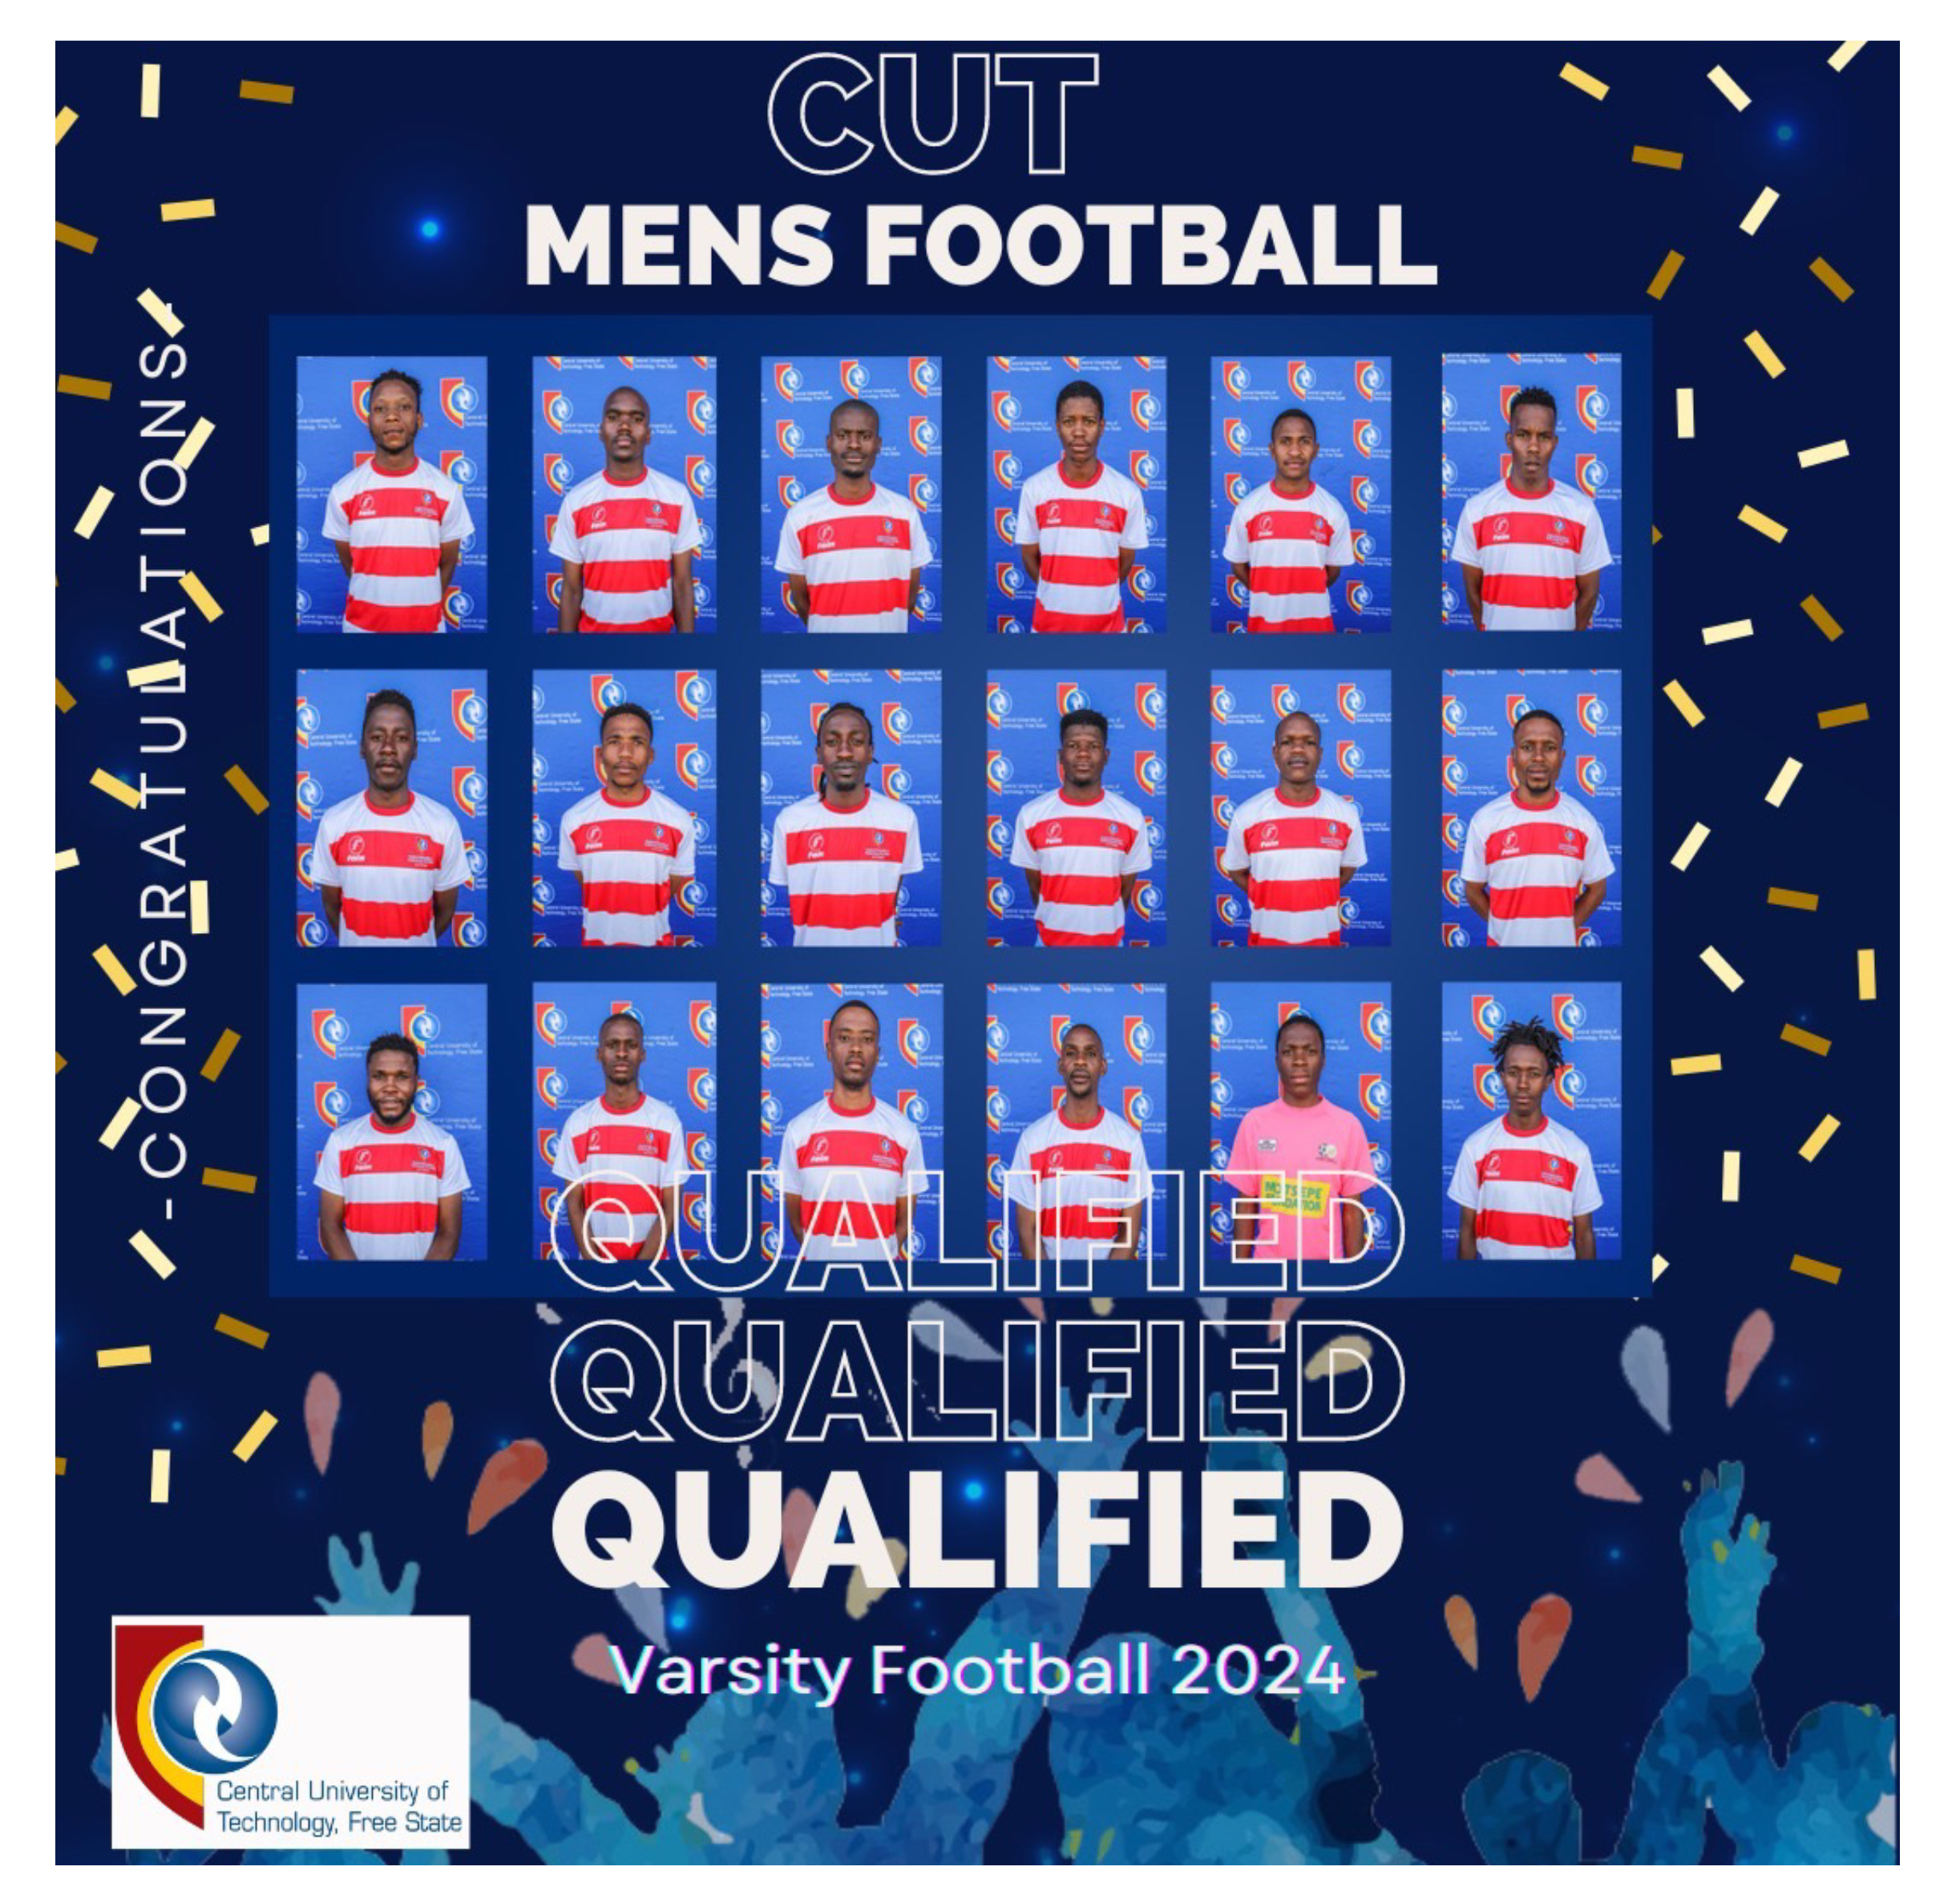 Congratulations to CUT Men and Women Football Clubs for making it to the Varsity Football 2024.